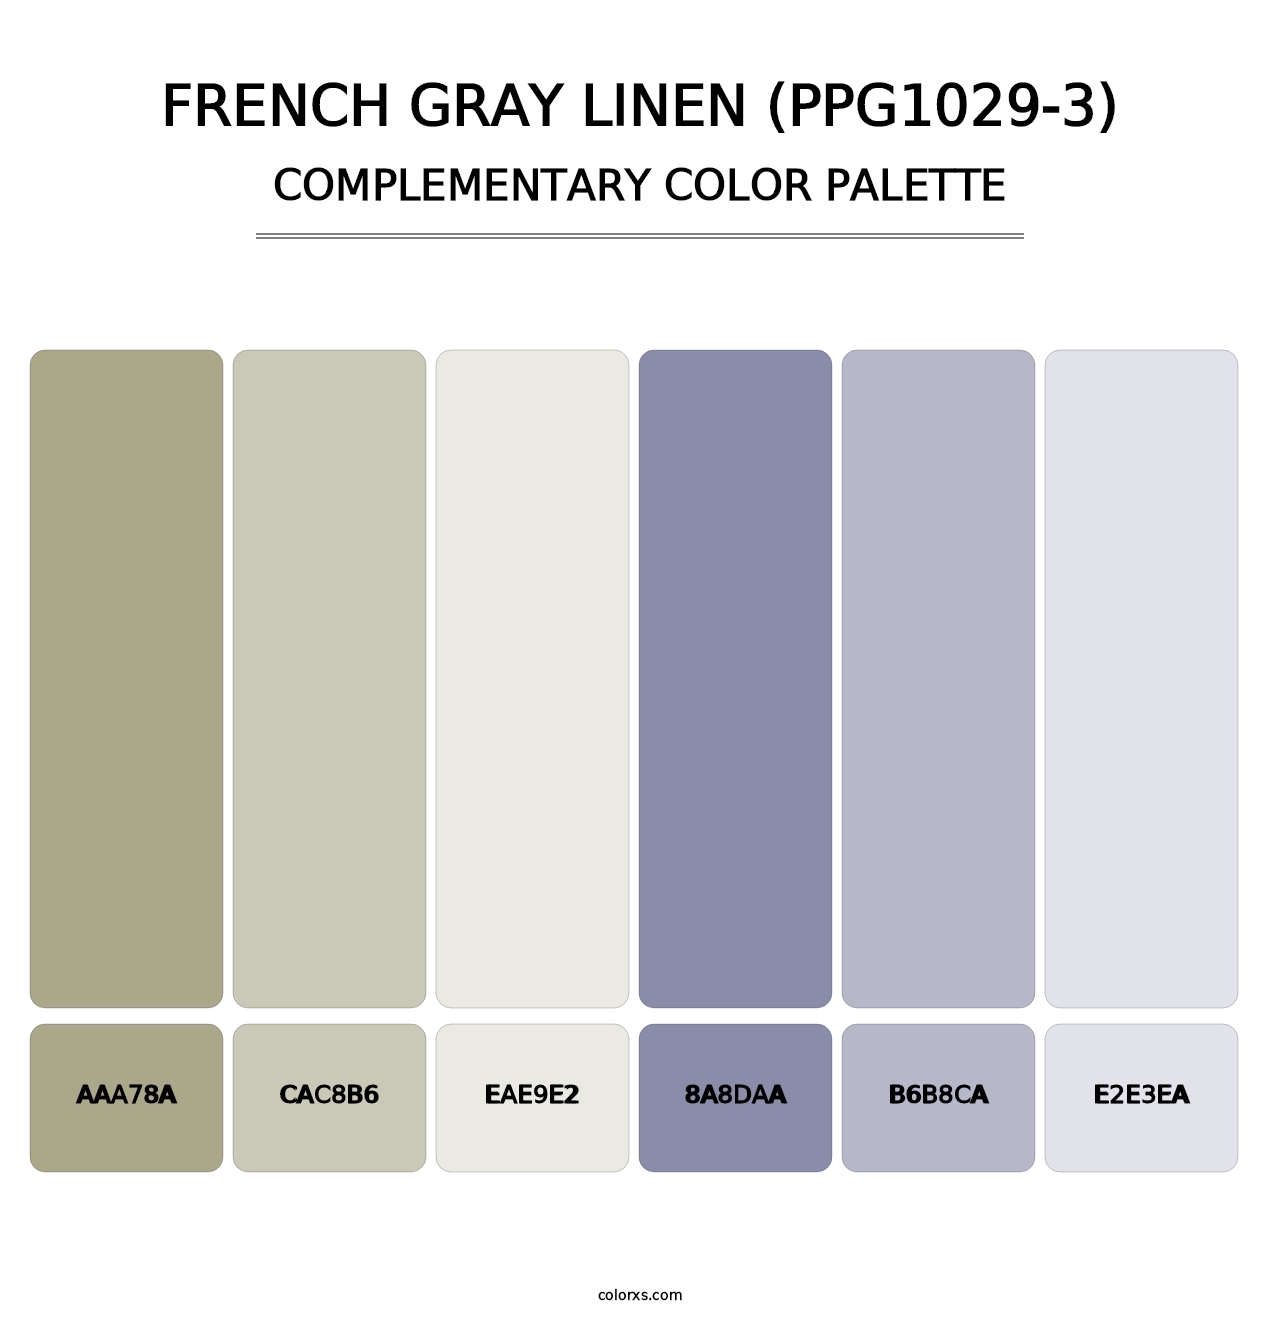 French Gray Linen (PPG1029-3) - Complementary Color Palette